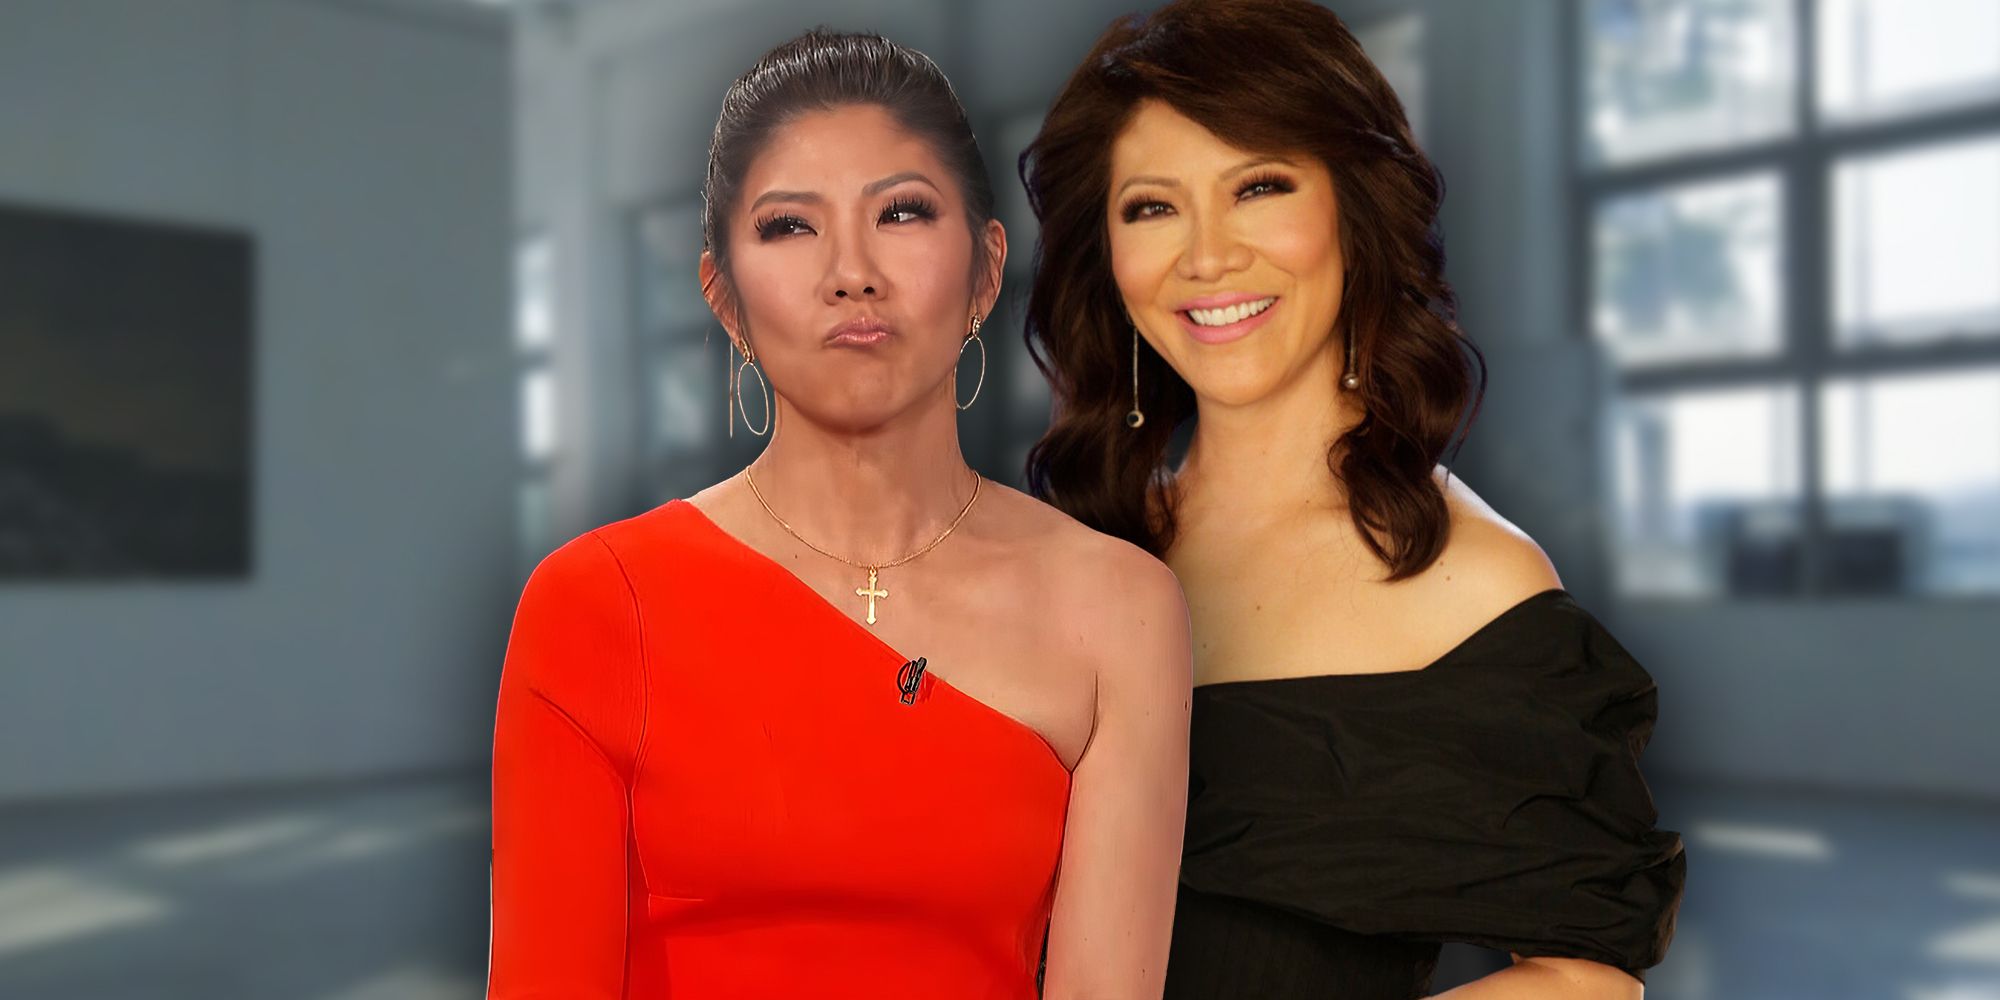 Side by side images of Big Brother's Julie Chen